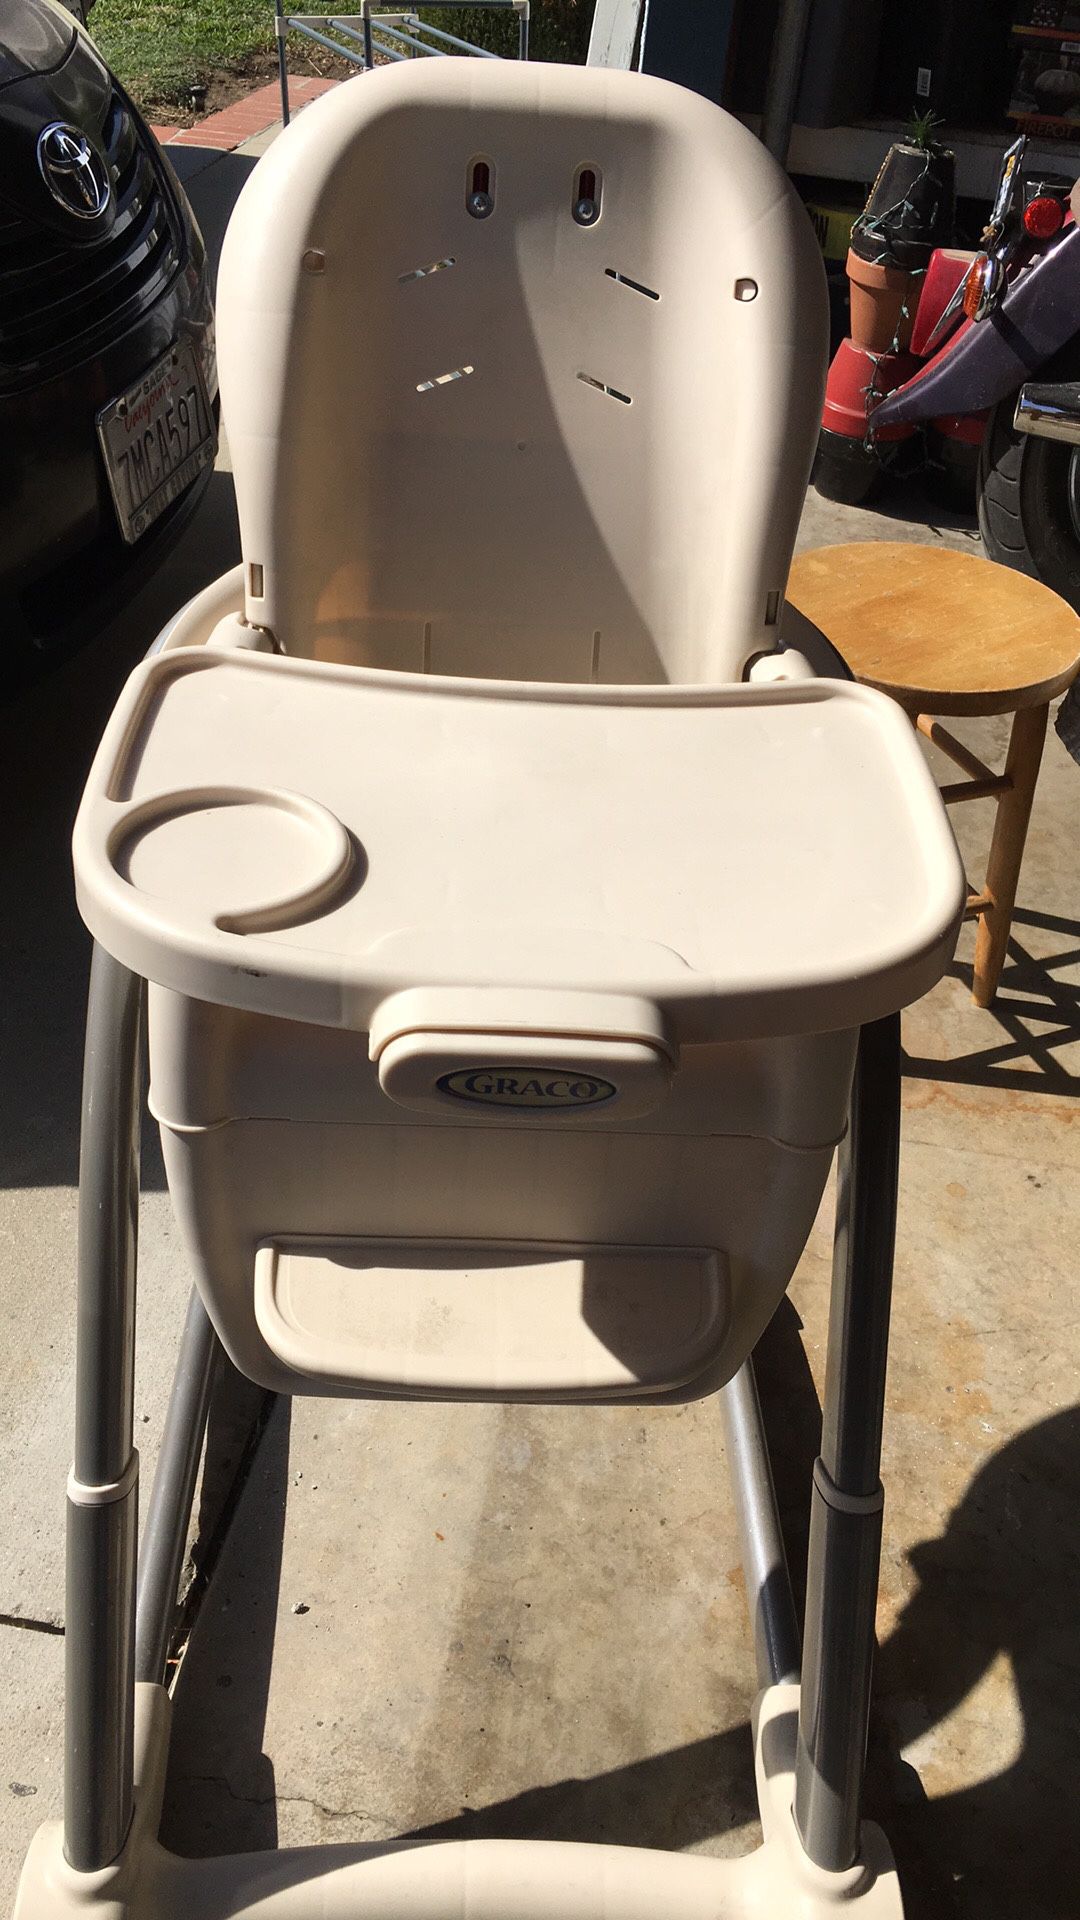 Booster seat / High chair Graco